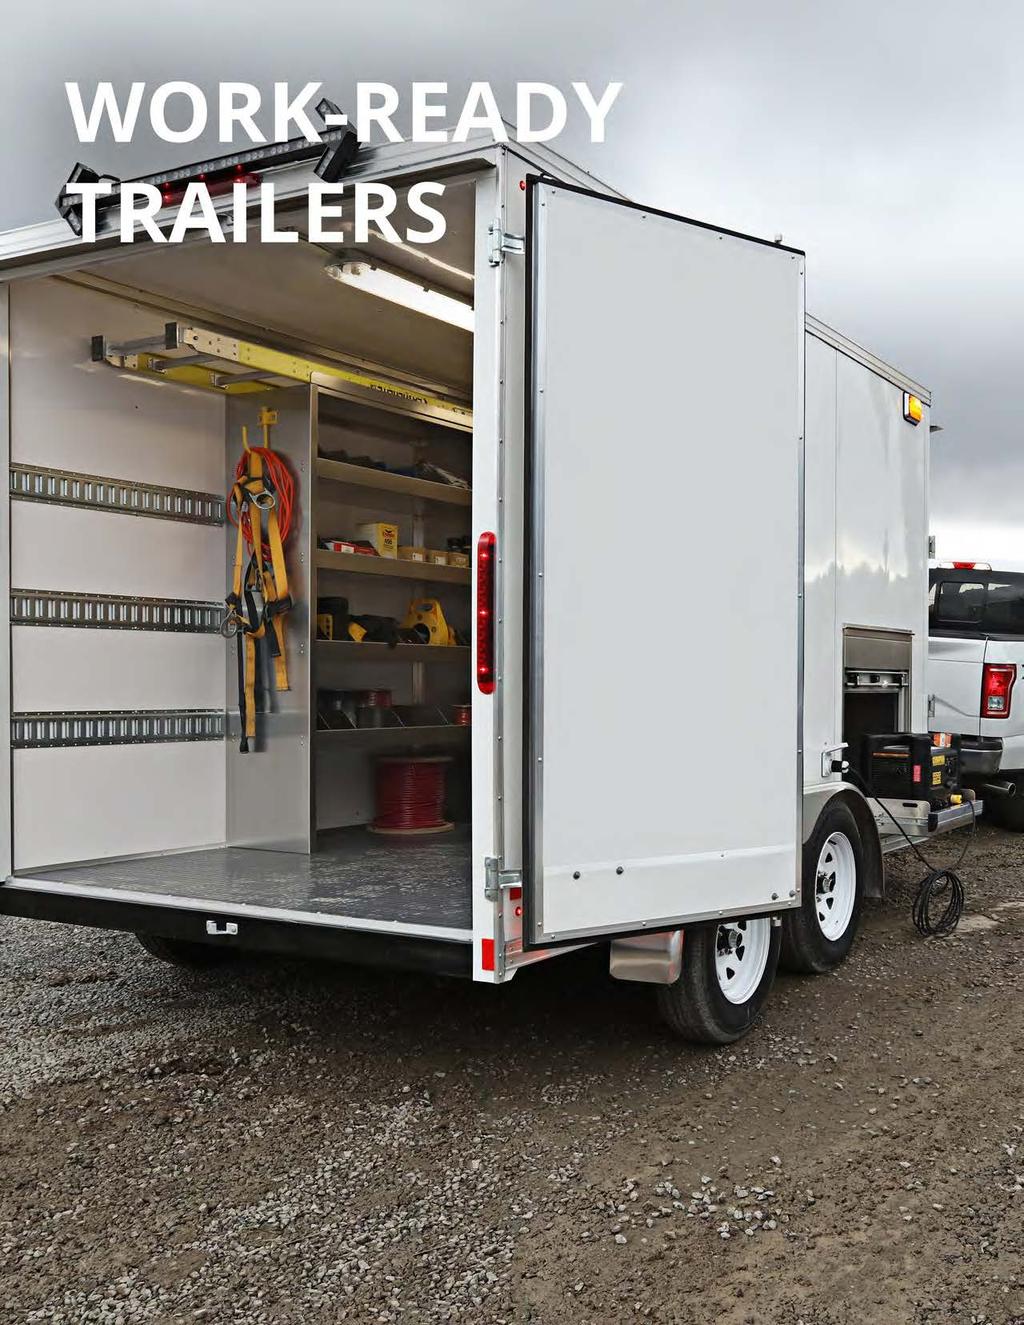 A MOBILE WORKSPACE THAT FITS YOUR SPECIFIC NEEDS When it comes to upfitting fleet trailers, EZ STAK ensures the process is easy.